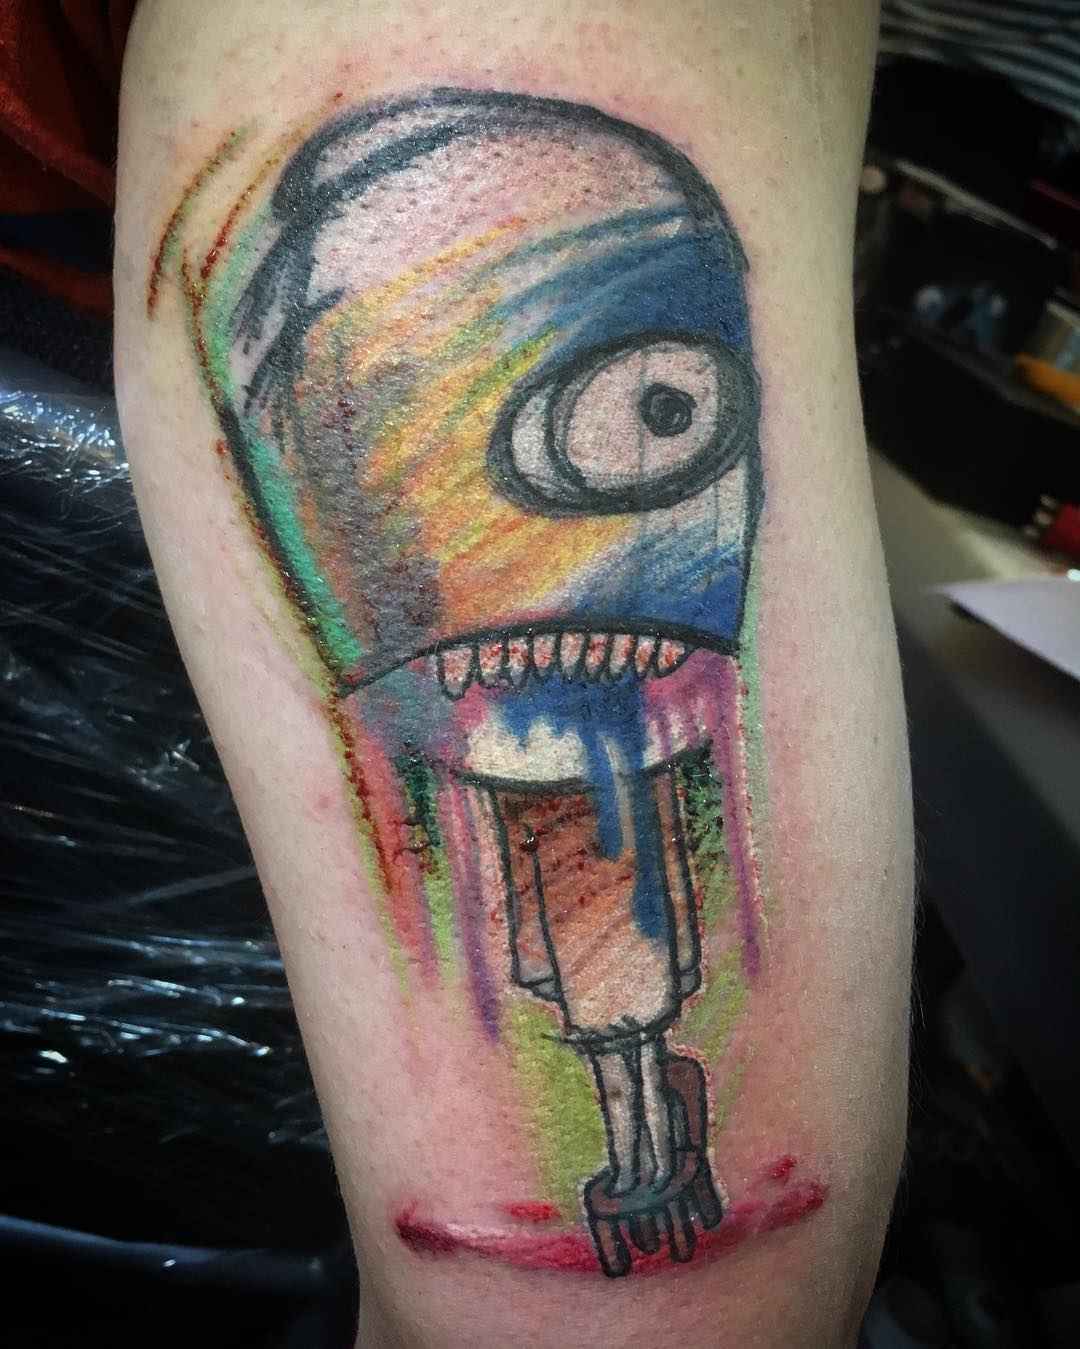 Discovered recently when we looked at our friends Mario mushroom tattoo  sideways it looks like Salad Fingers  rmildlyinteresting